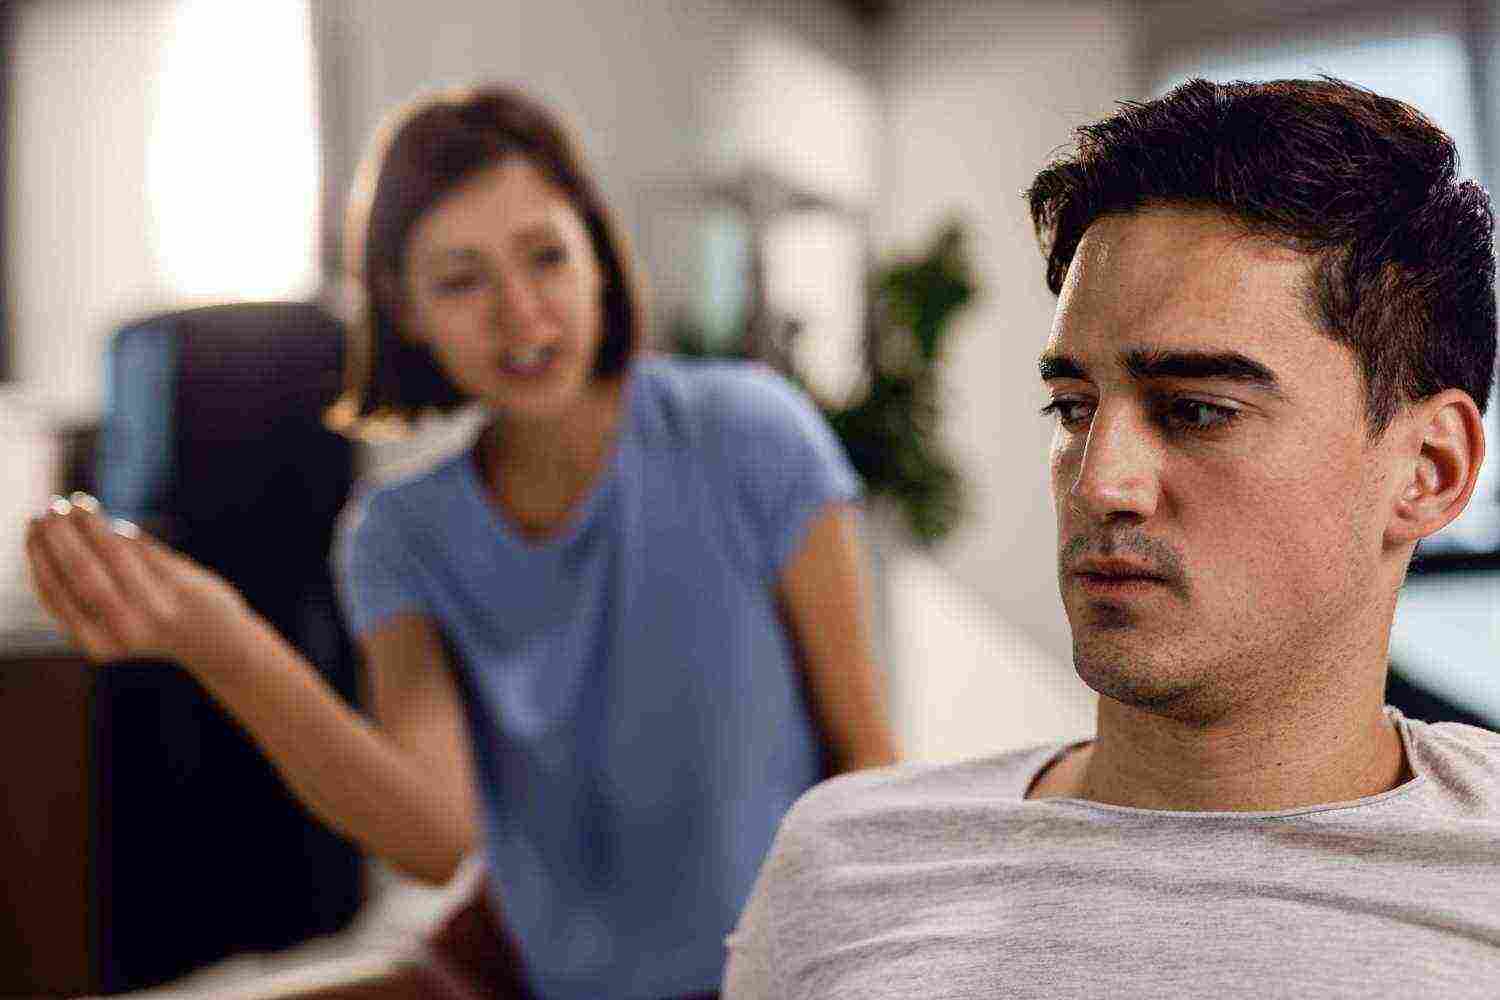 sad man having conflict with his girlfriend thinking their relationship difficulties